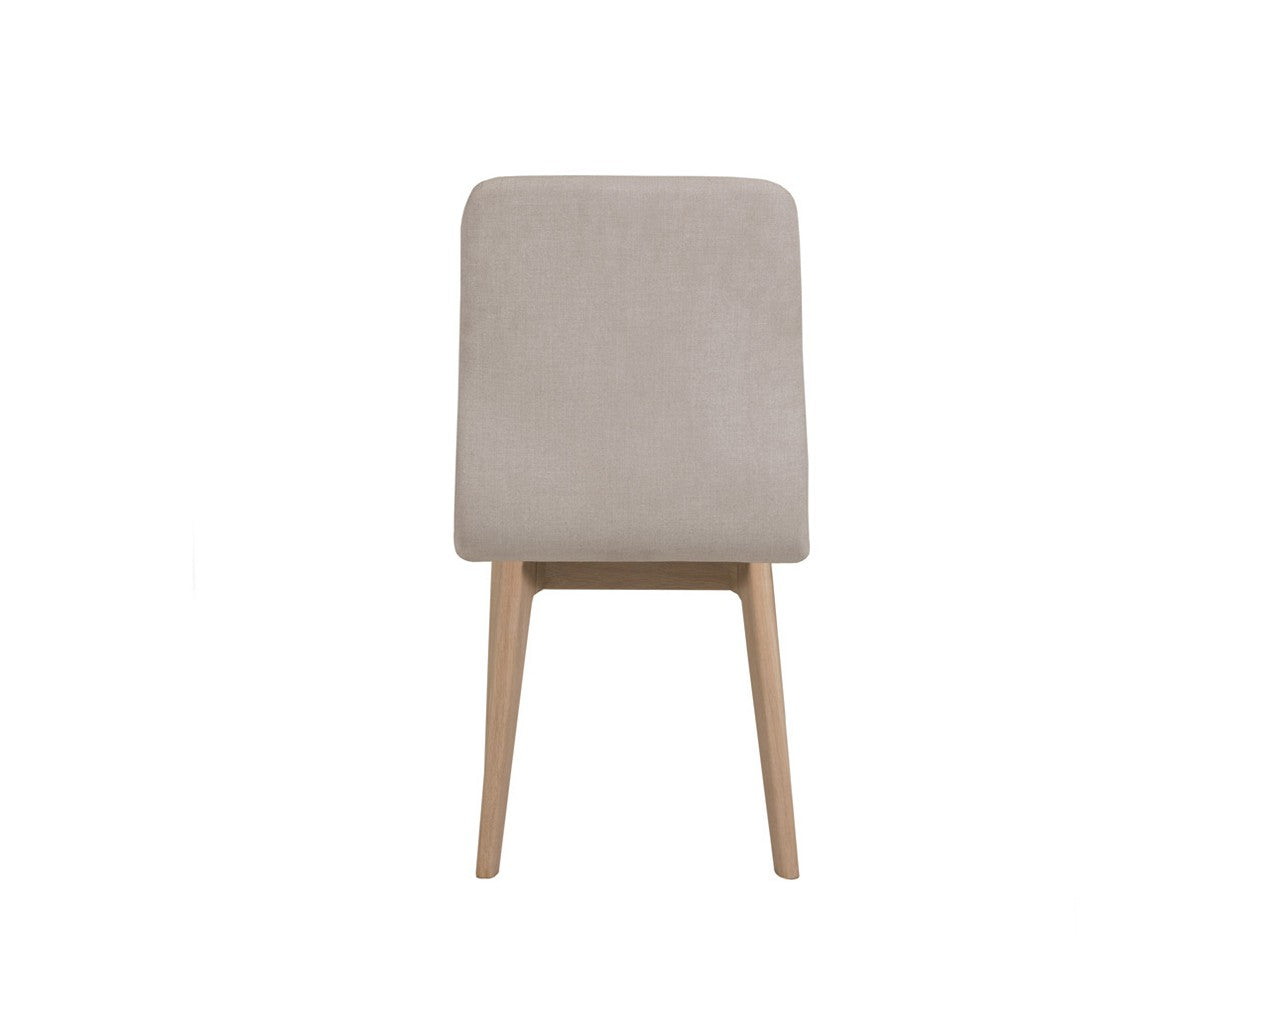 Marlow Dining Chair